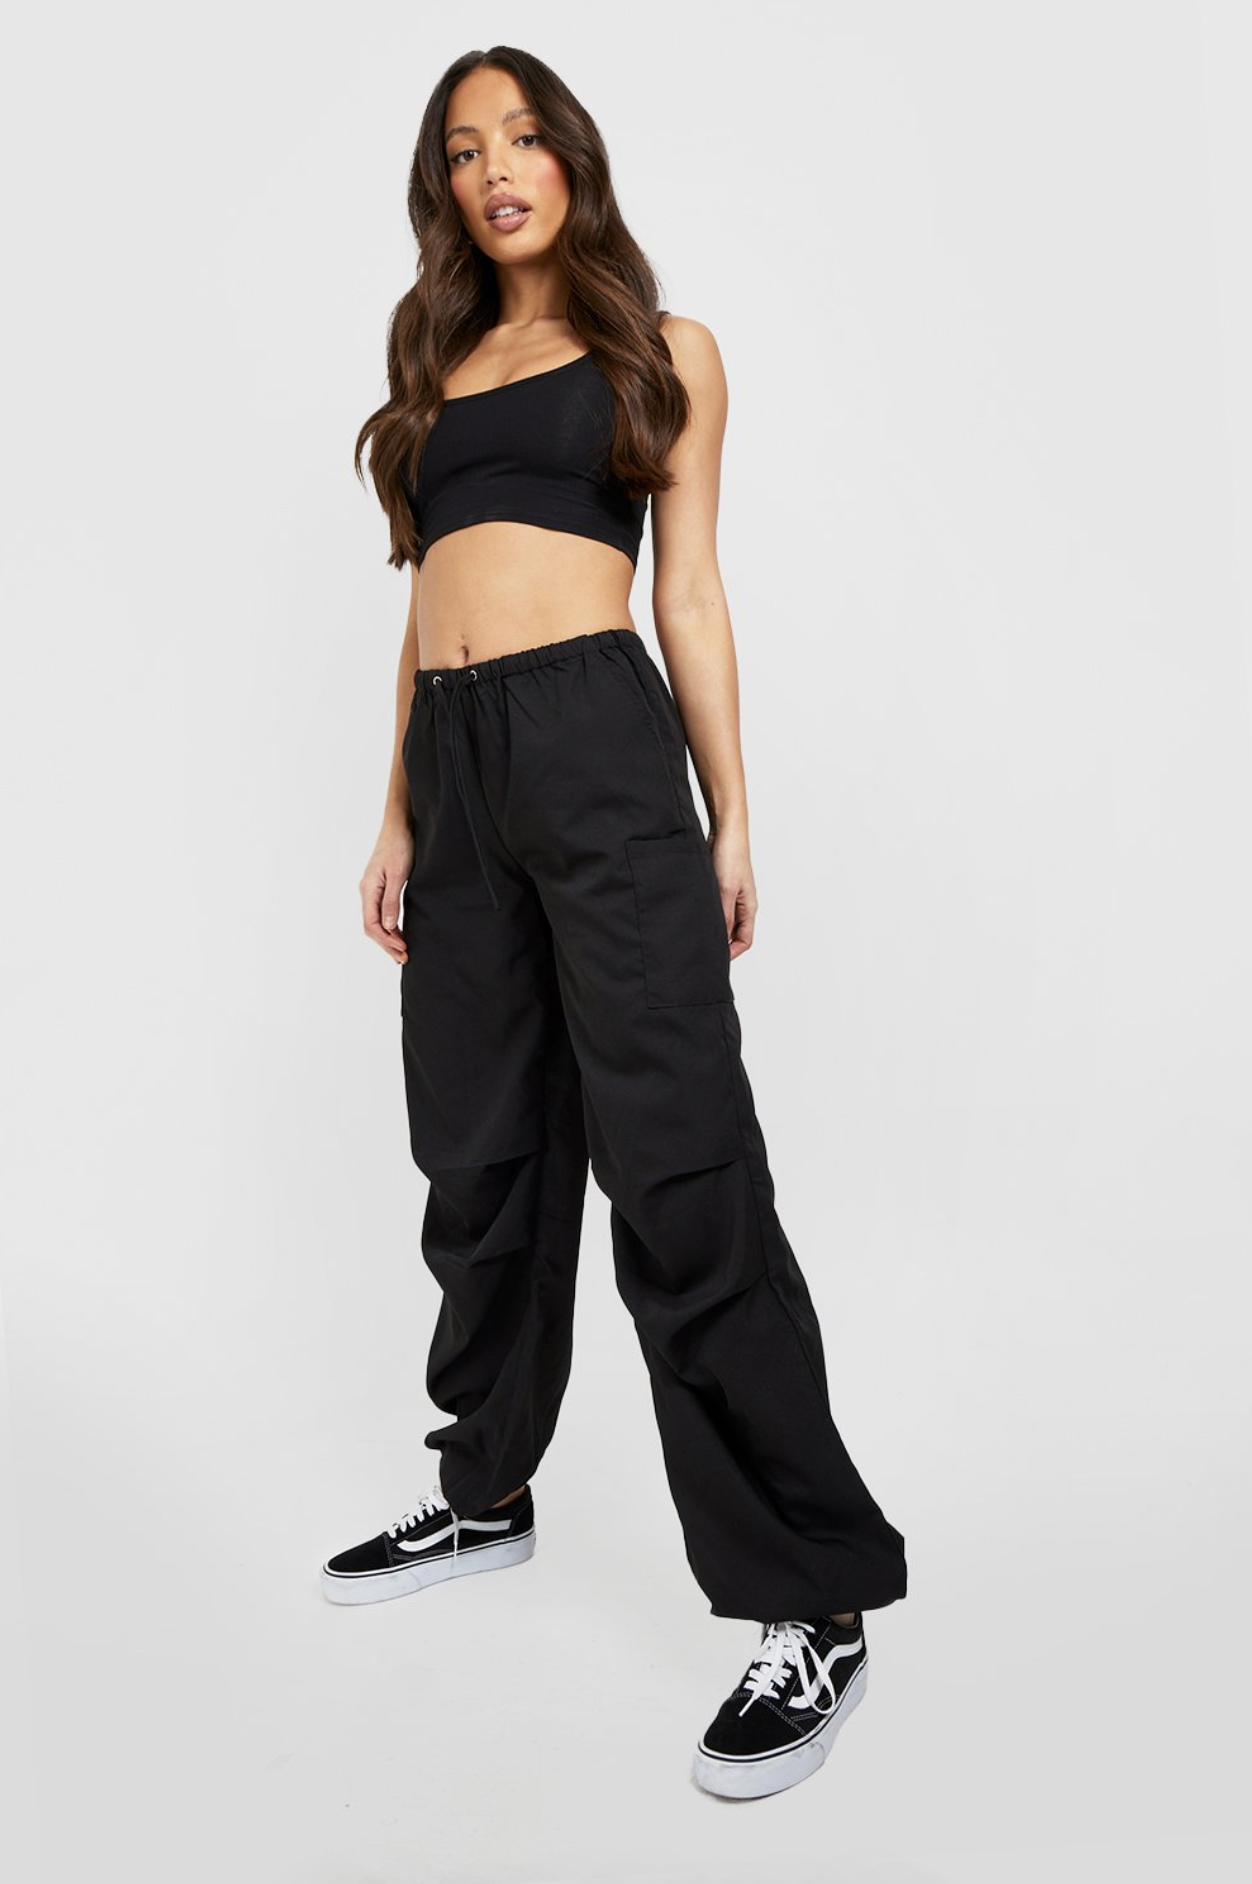 Harajuku Oversized Cargo Parachute Pants For Women Vintage Y2K Hip Hop  Streetwear With Wide Leg Joggers And Baggy Cargo Sweatpants Women By  HOUZHOU Style 230223 From Hui04, $17.19 | DHgate.Com